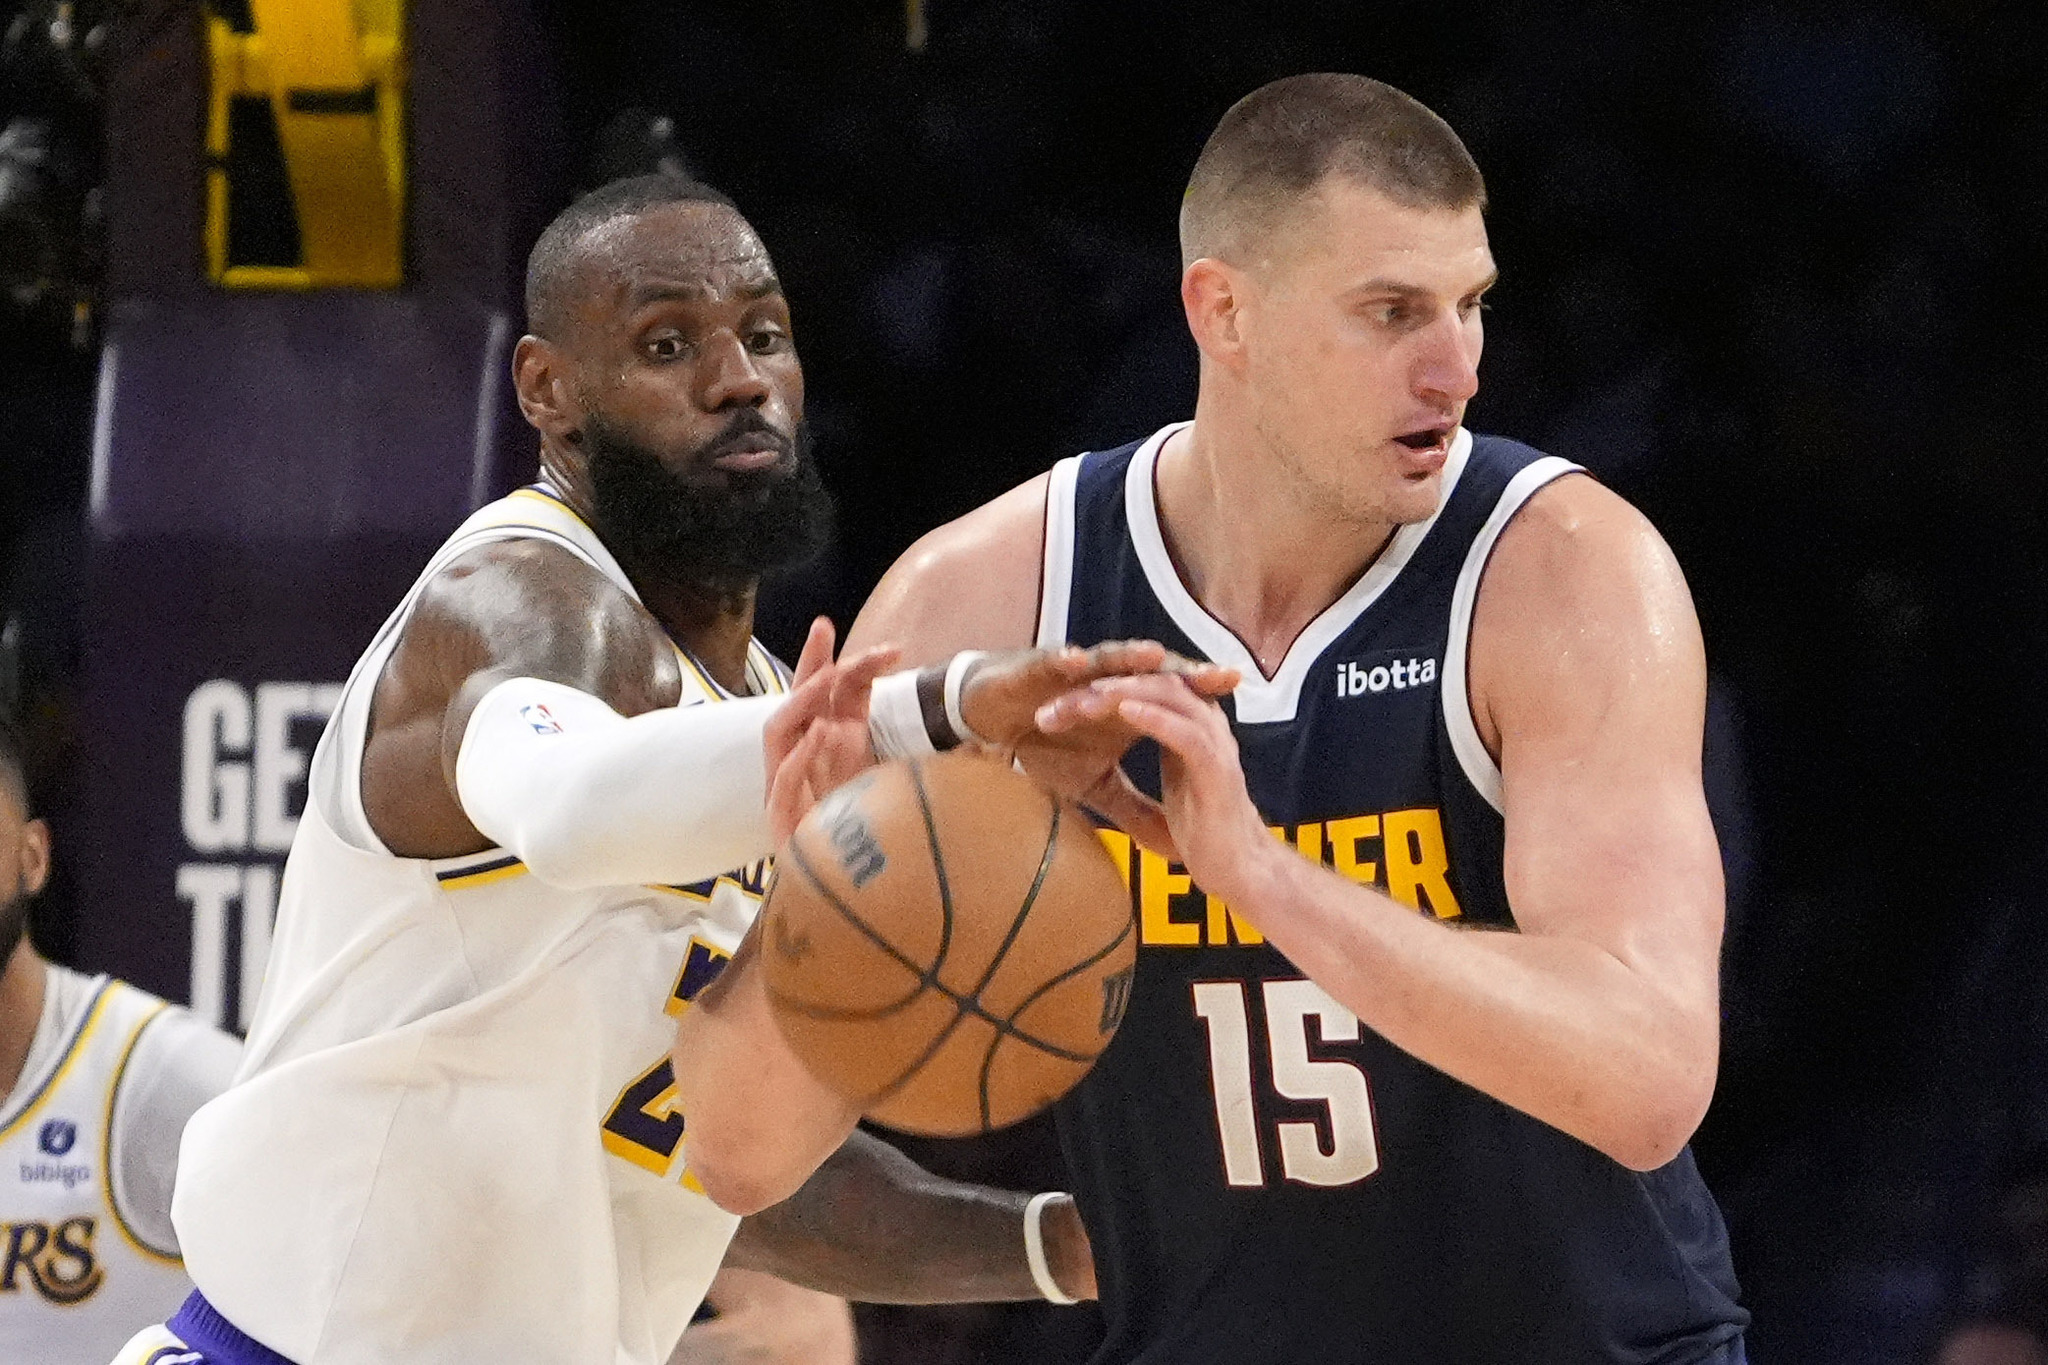 Nikola Jokic will have to watch his brother or face more trouble: A fan accuses him of trying to push him